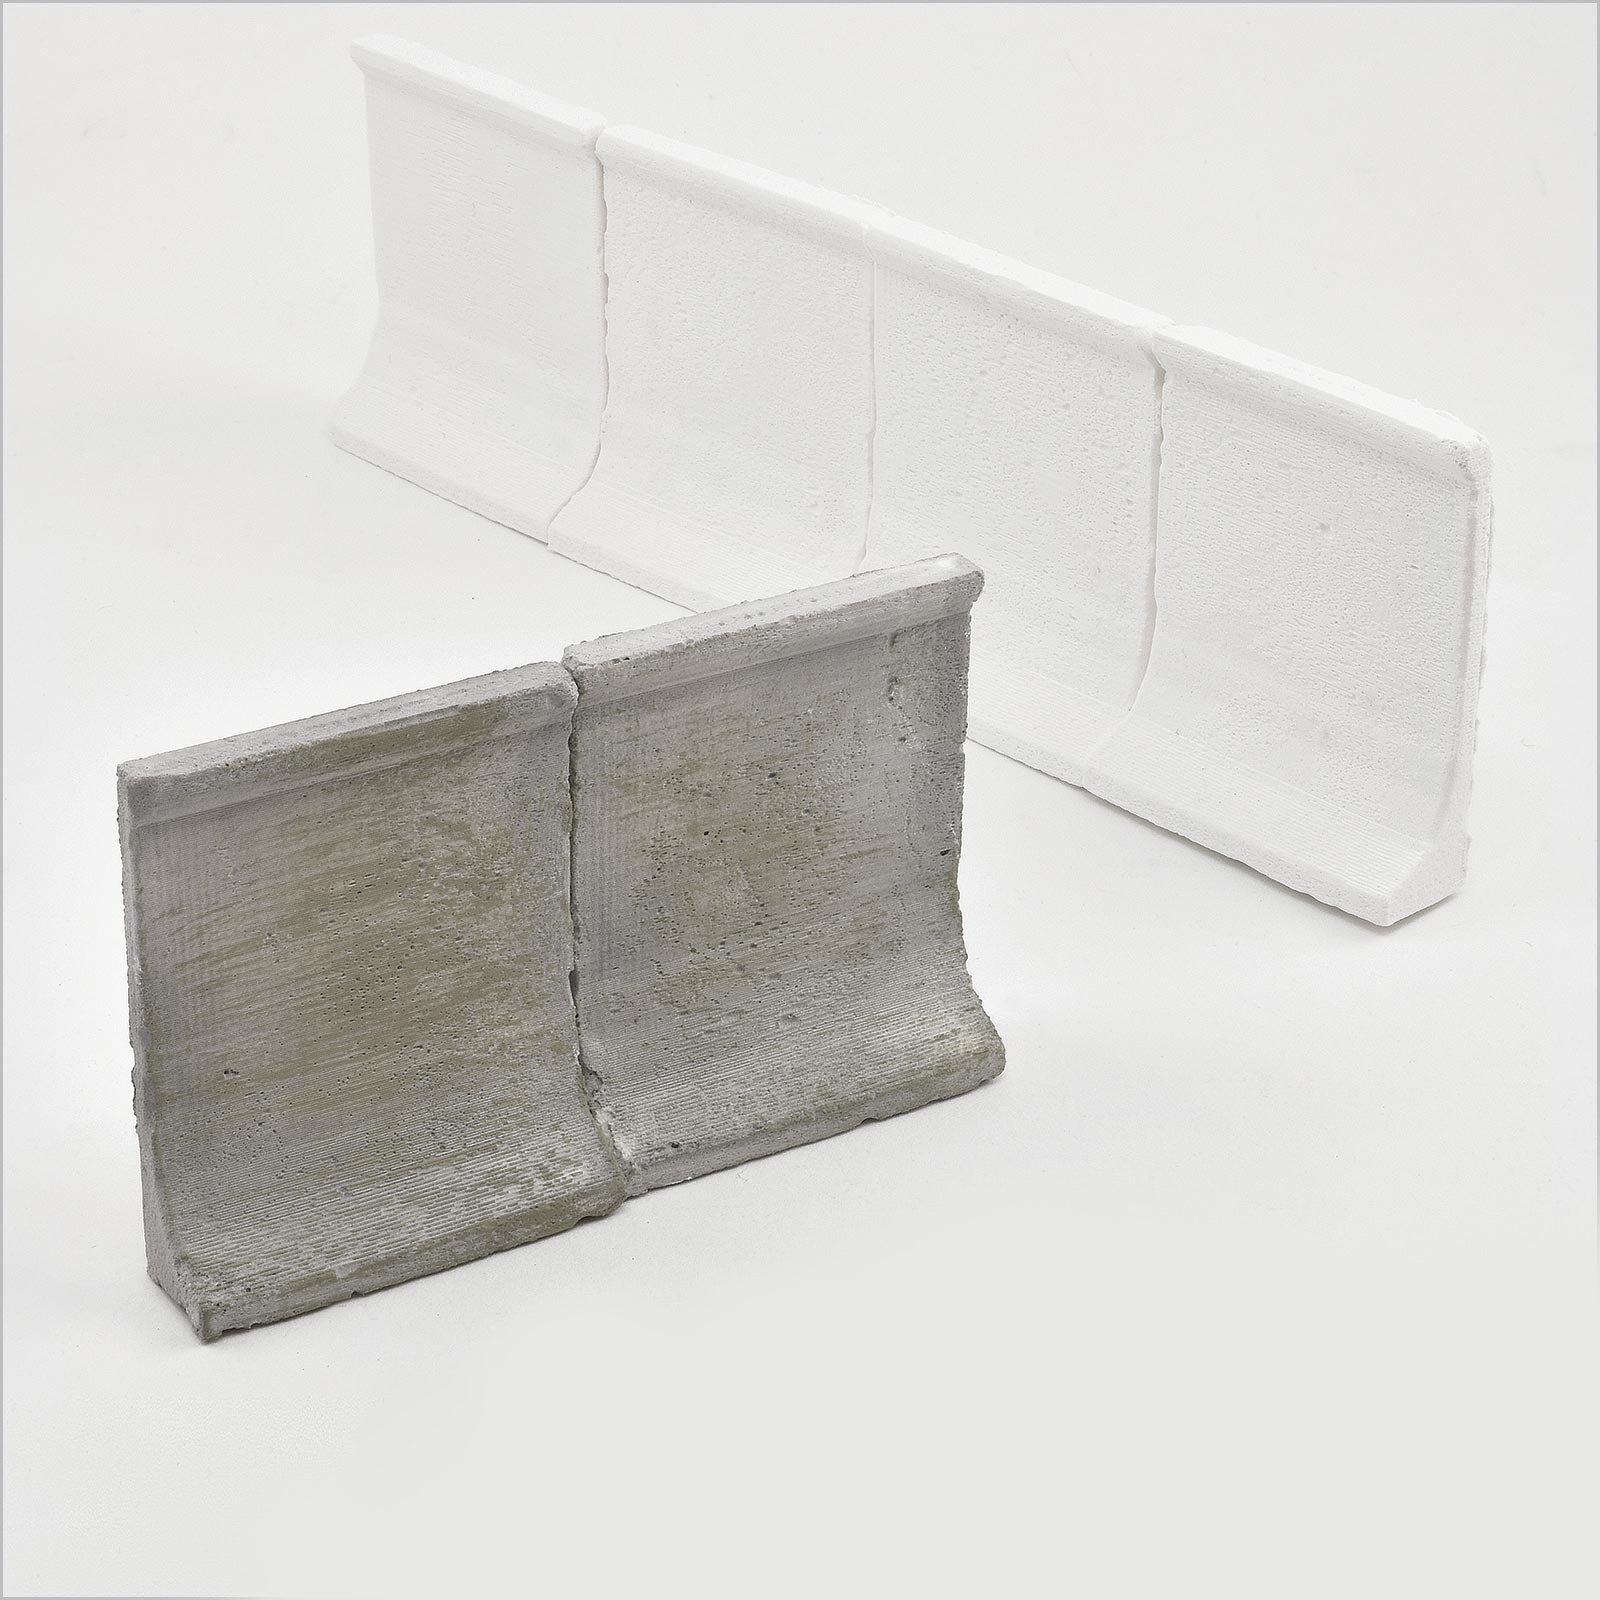 Concrete Retaining Walls 4 Pack, HO Scale, By Scientific